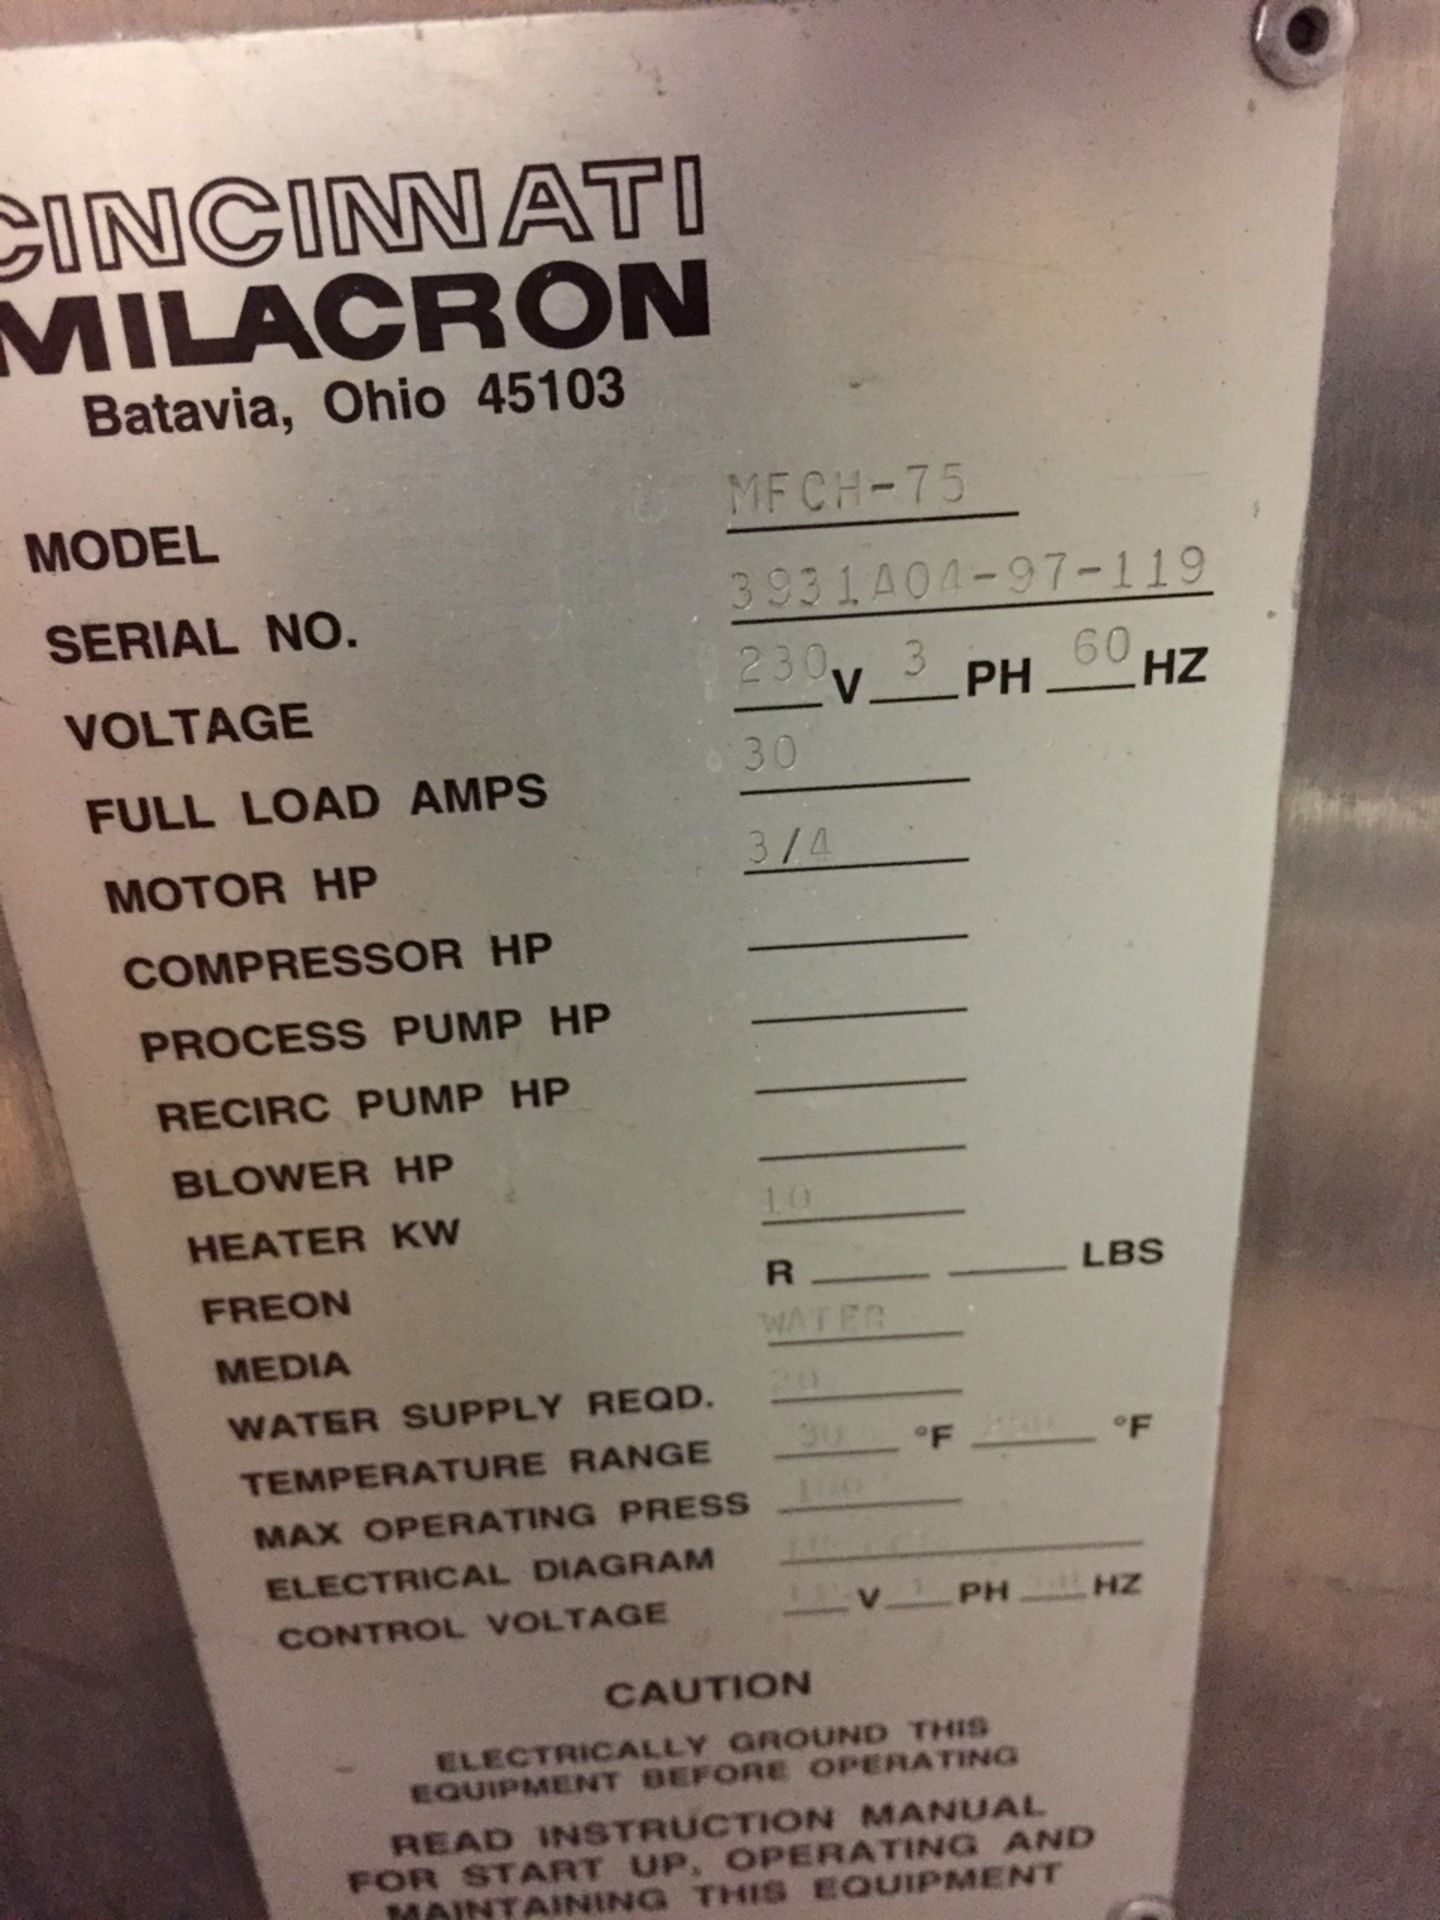 Milacron MFCH-75 Temperature Controller, S/N 3931A04-97-119 | Loaded on a Pallet by Seller at No - Image 2 of 2